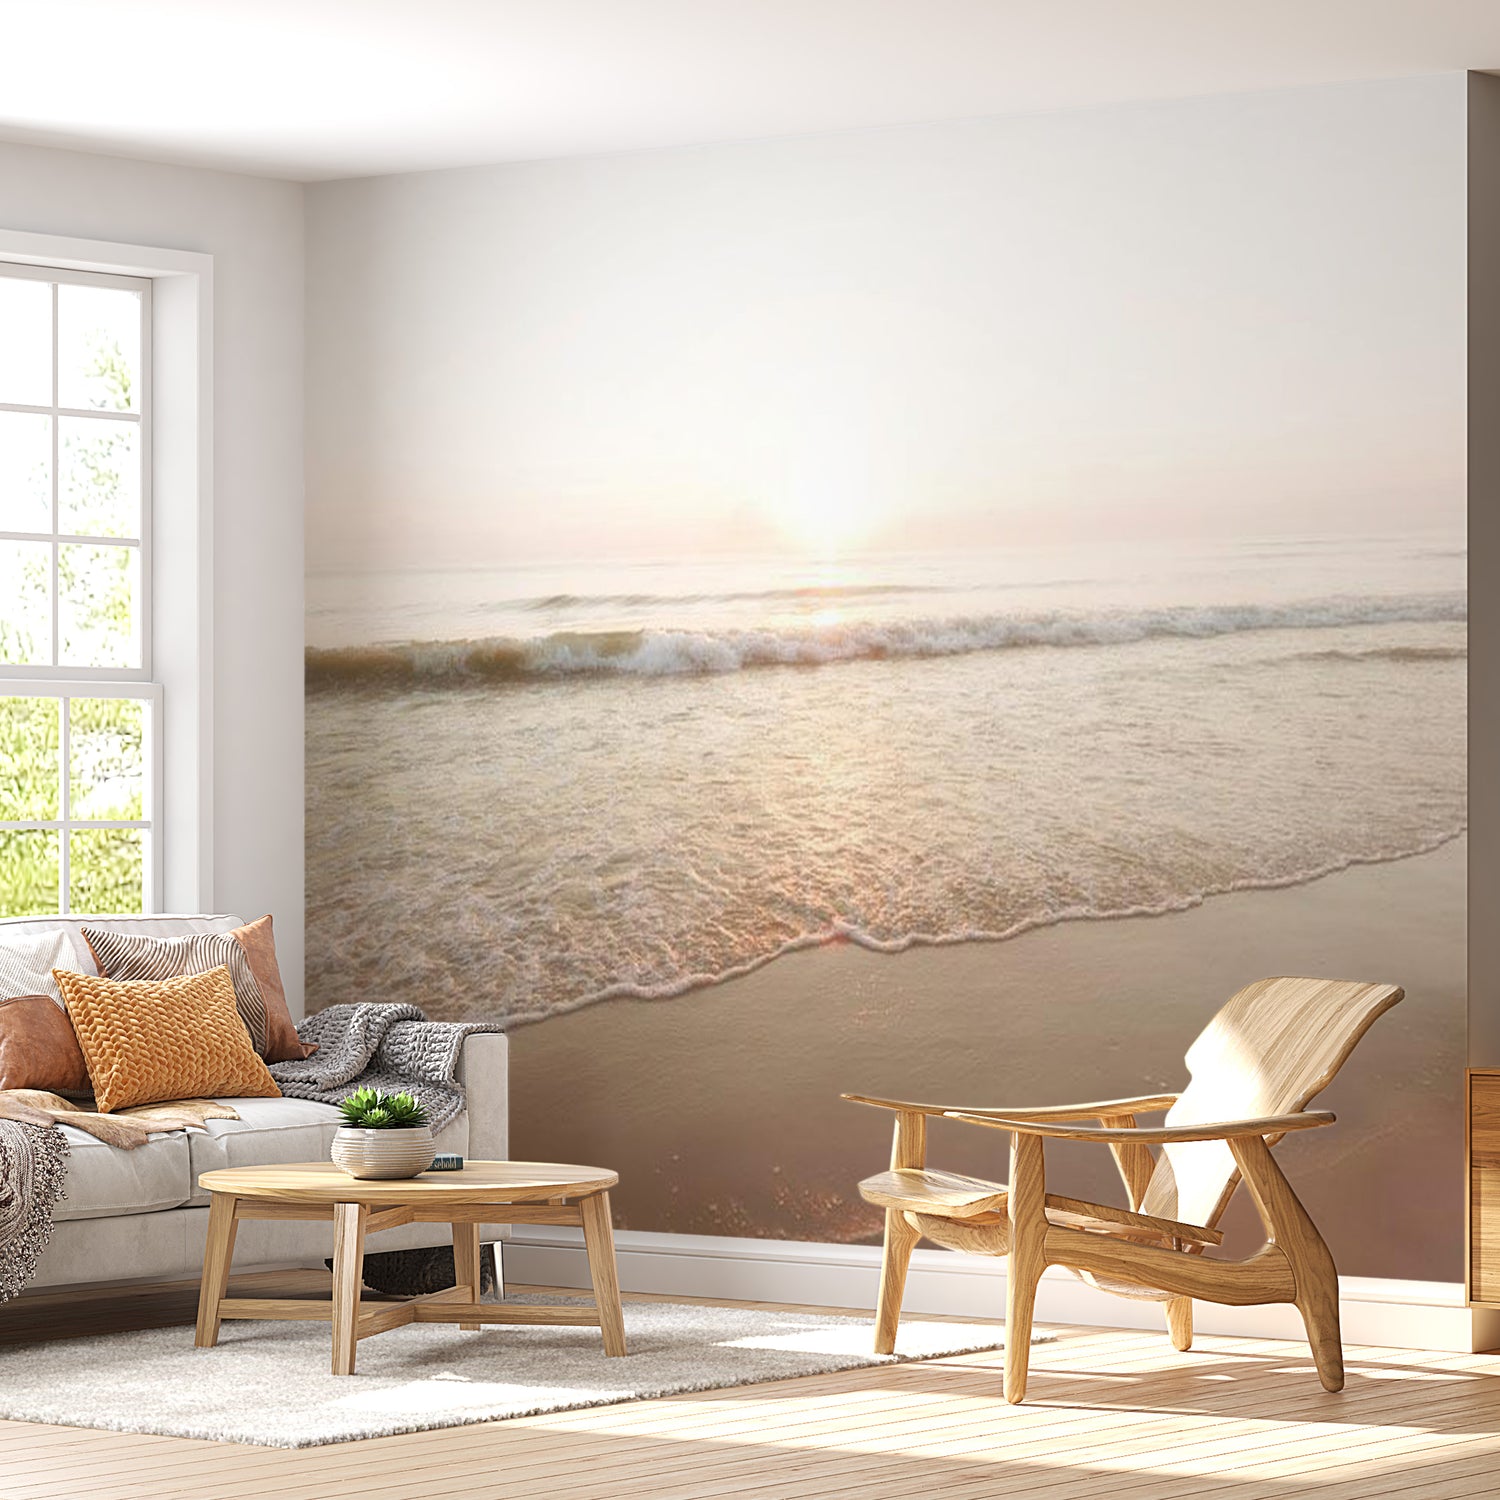 Peel & Stick Beach Wall Mural - Magnificent Morning - Removable Wall Decals